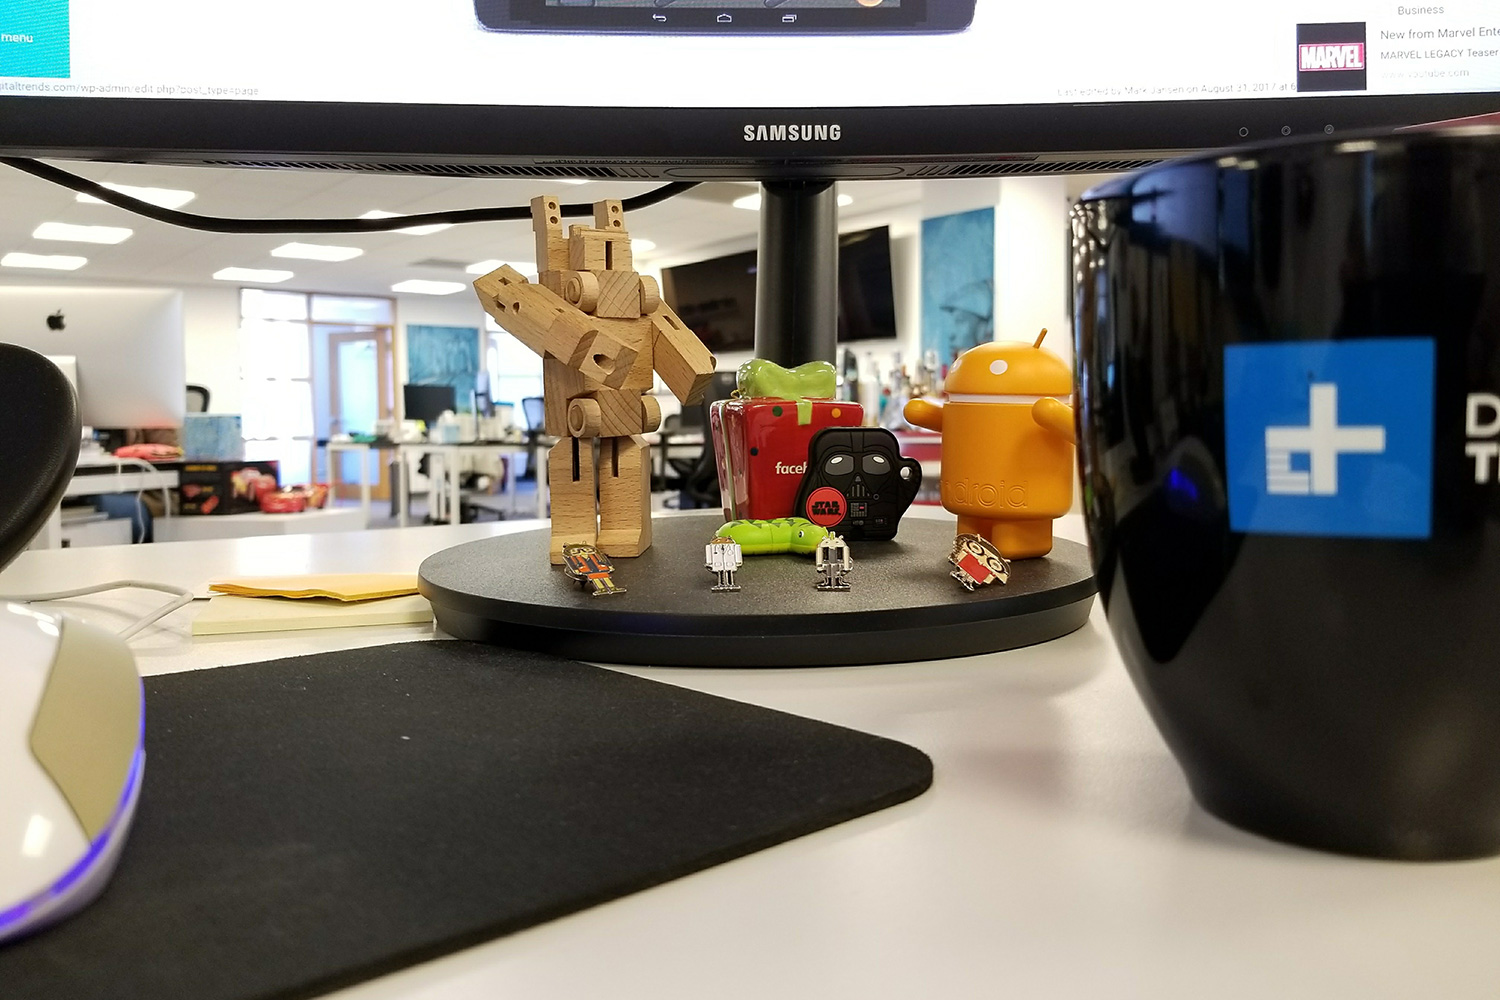 galaxy note 8 camera sample office dual capture